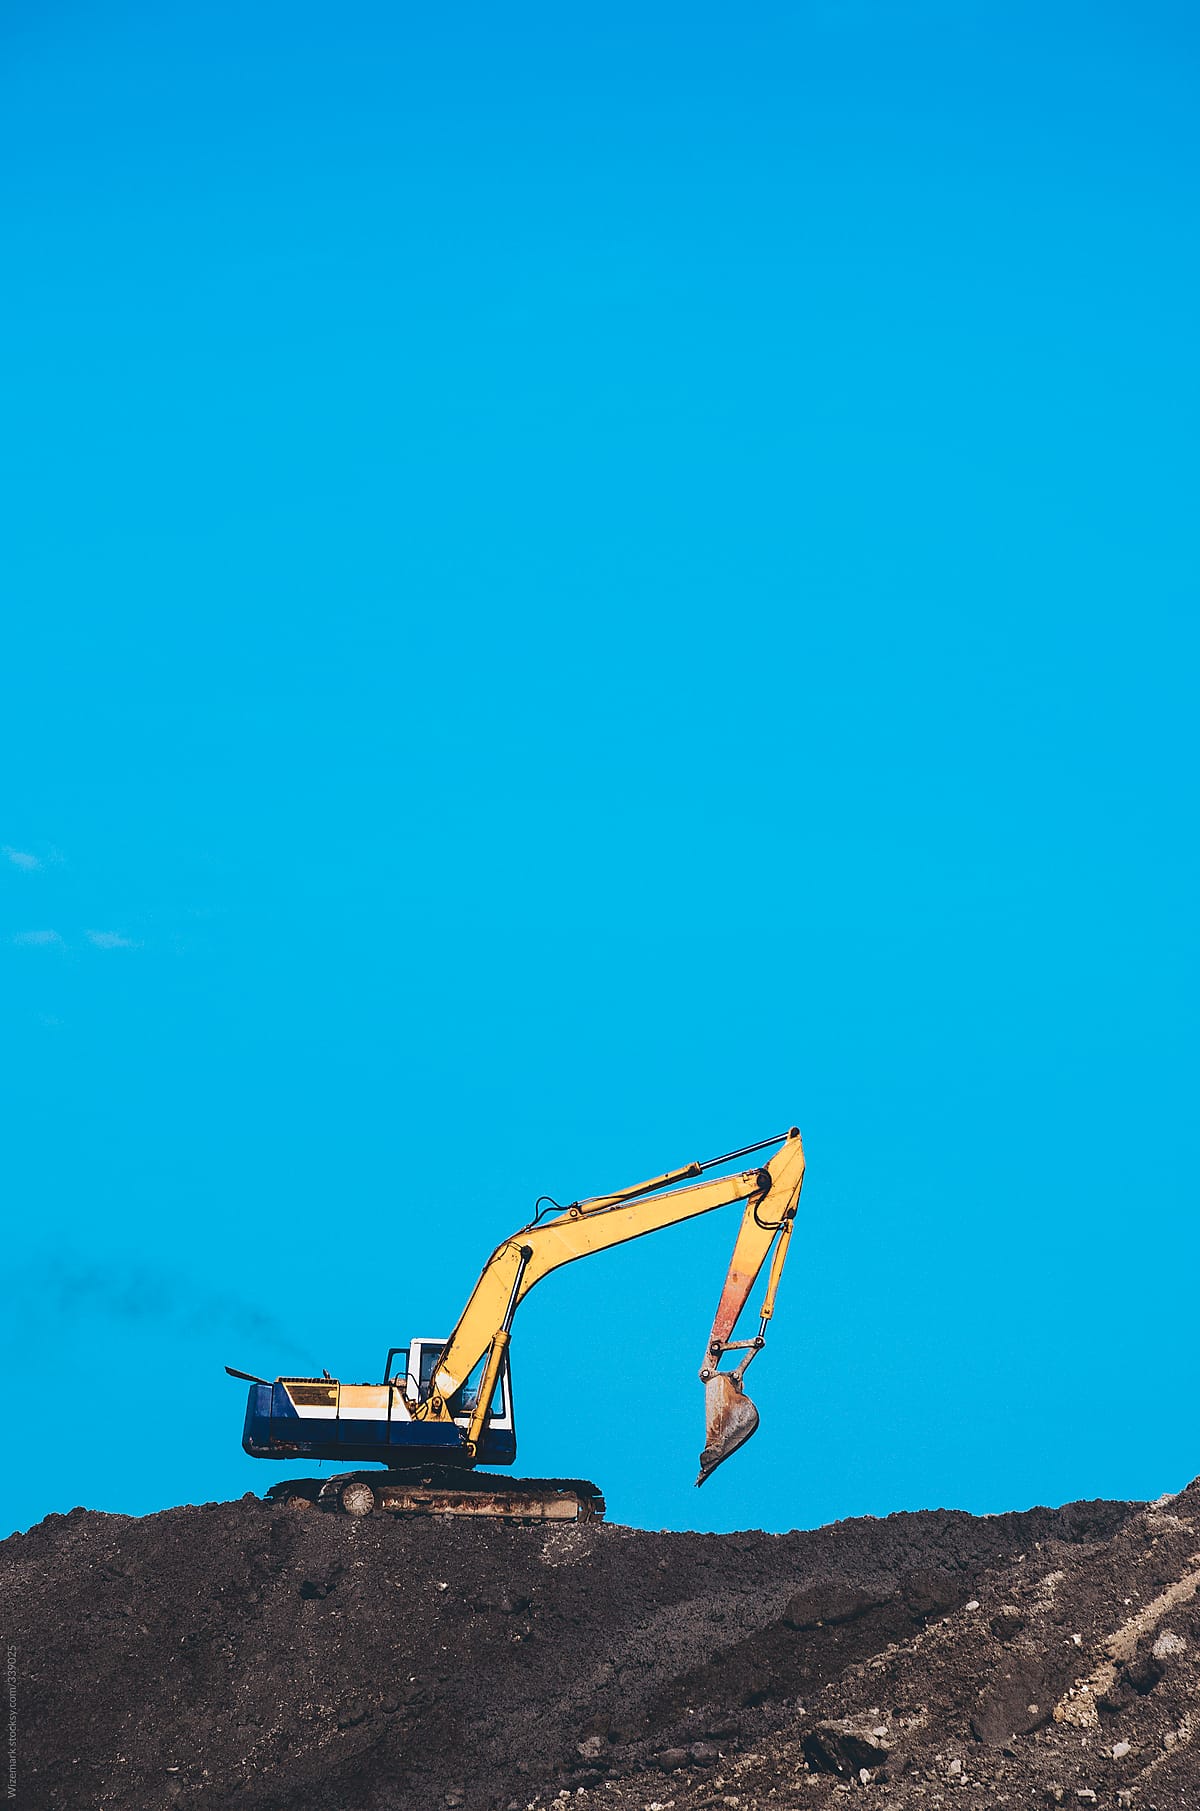 Excavator working on the construction site